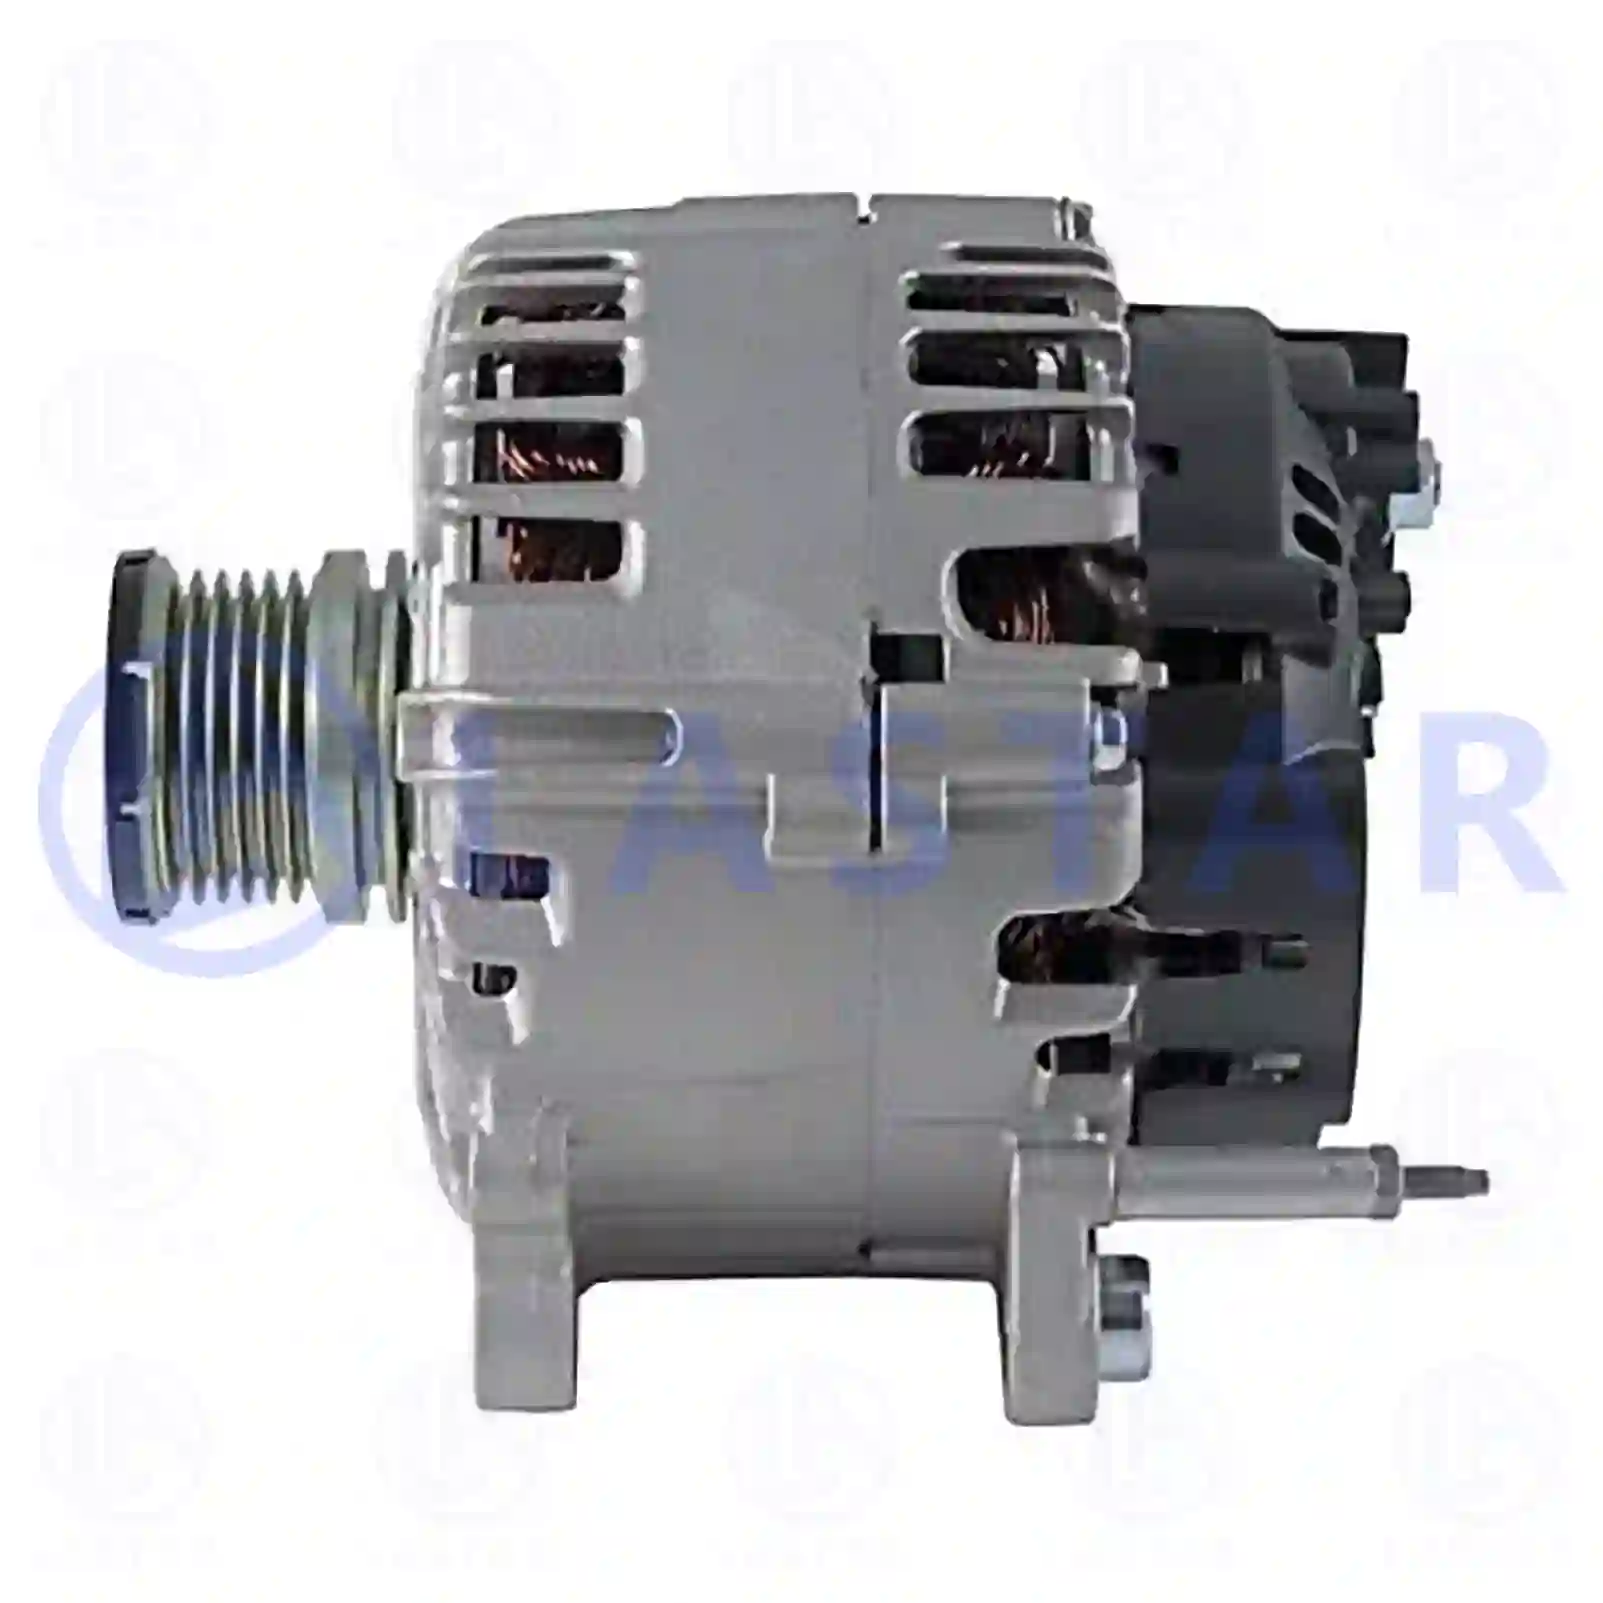 Alternator, 77710107, 03G903016L, 03L903023M, 03L903023N, 03L903024E, 03L903024L, 65261016004, 65261016005, 03G903016L, 03L903023M, 03L903023N, 03L903024E, 03L903024L, 03G903016L, 03G903016LX, 03L903023M, 03L903023MX, 03L903023N, 03L903023NX, 03L903024E, 03L903024L, 03L903024LX, 03L903024N, 03L903024NX, 04L903024A ||  77710107 Lastar Spare Part | Truck Spare Parts, Auotomotive Spare Parts Alternator, 77710107, 03G903016L, 03L903023M, 03L903023N, 03L903024E, 03L903024L, 65261016004, 65261016005, 03G903016L, 03L903023M, 03L903023N, 03L903024E, 03L903024L, 03G903016L, 03G903016LX, 03L903023M, 03L903023MX, 03L903023N, 03L903023NX, 03L903024E, 03L903024L, 03L903024LX, 03L903024N, 03L903024NX, 04L903024A ||  77710107 Lastar Spare Part | Truck Spare Parts, Auotomotive Spare Parts